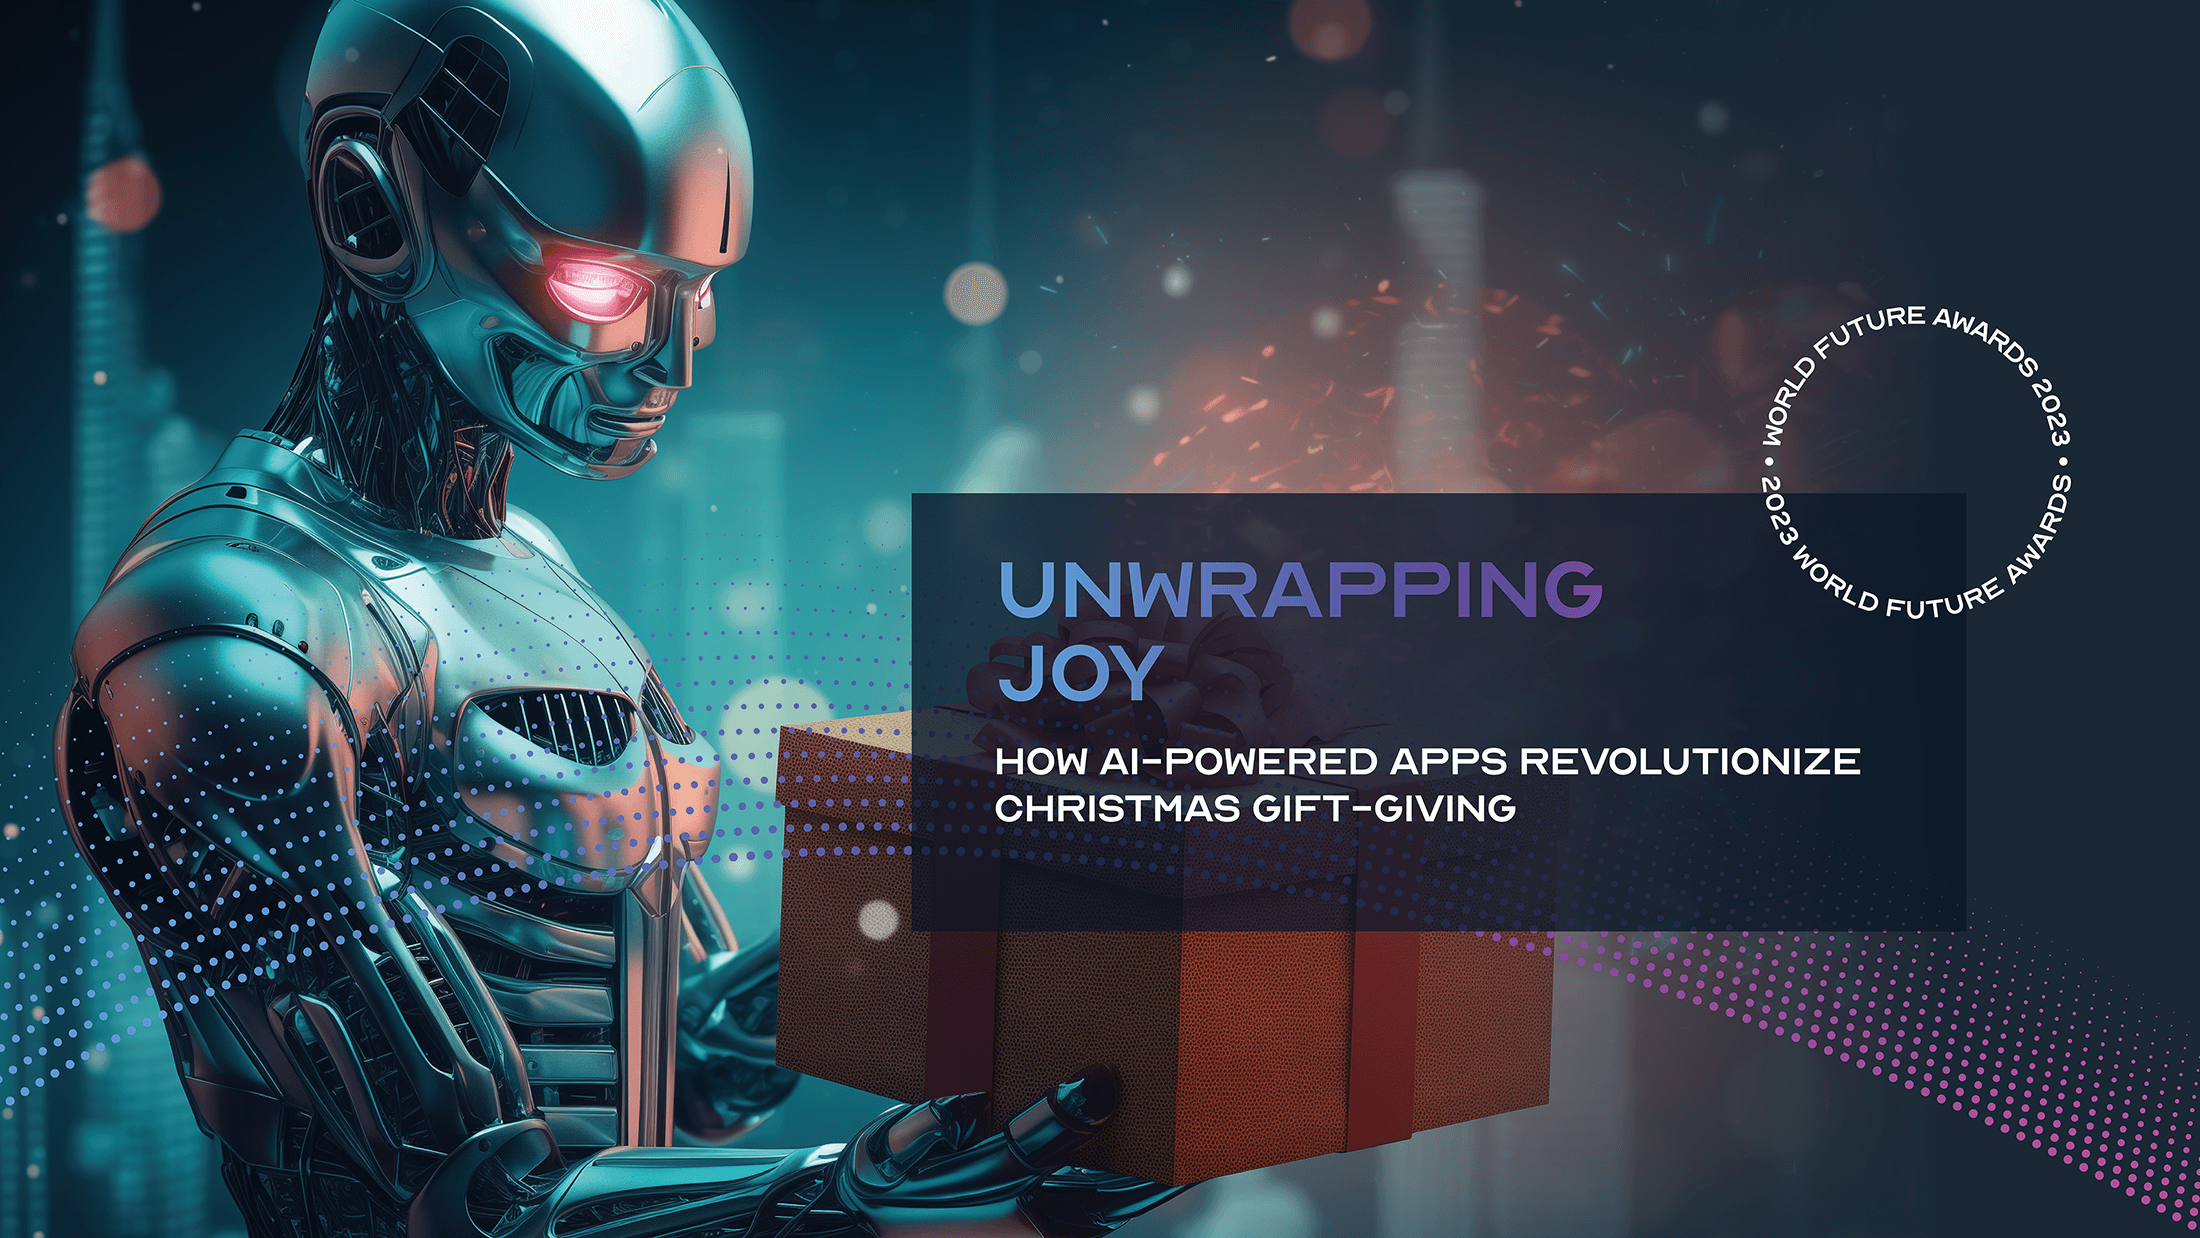 Unwrapping Joy: How AI-Powered Apps Revolutionize Christmas Gift-Giving